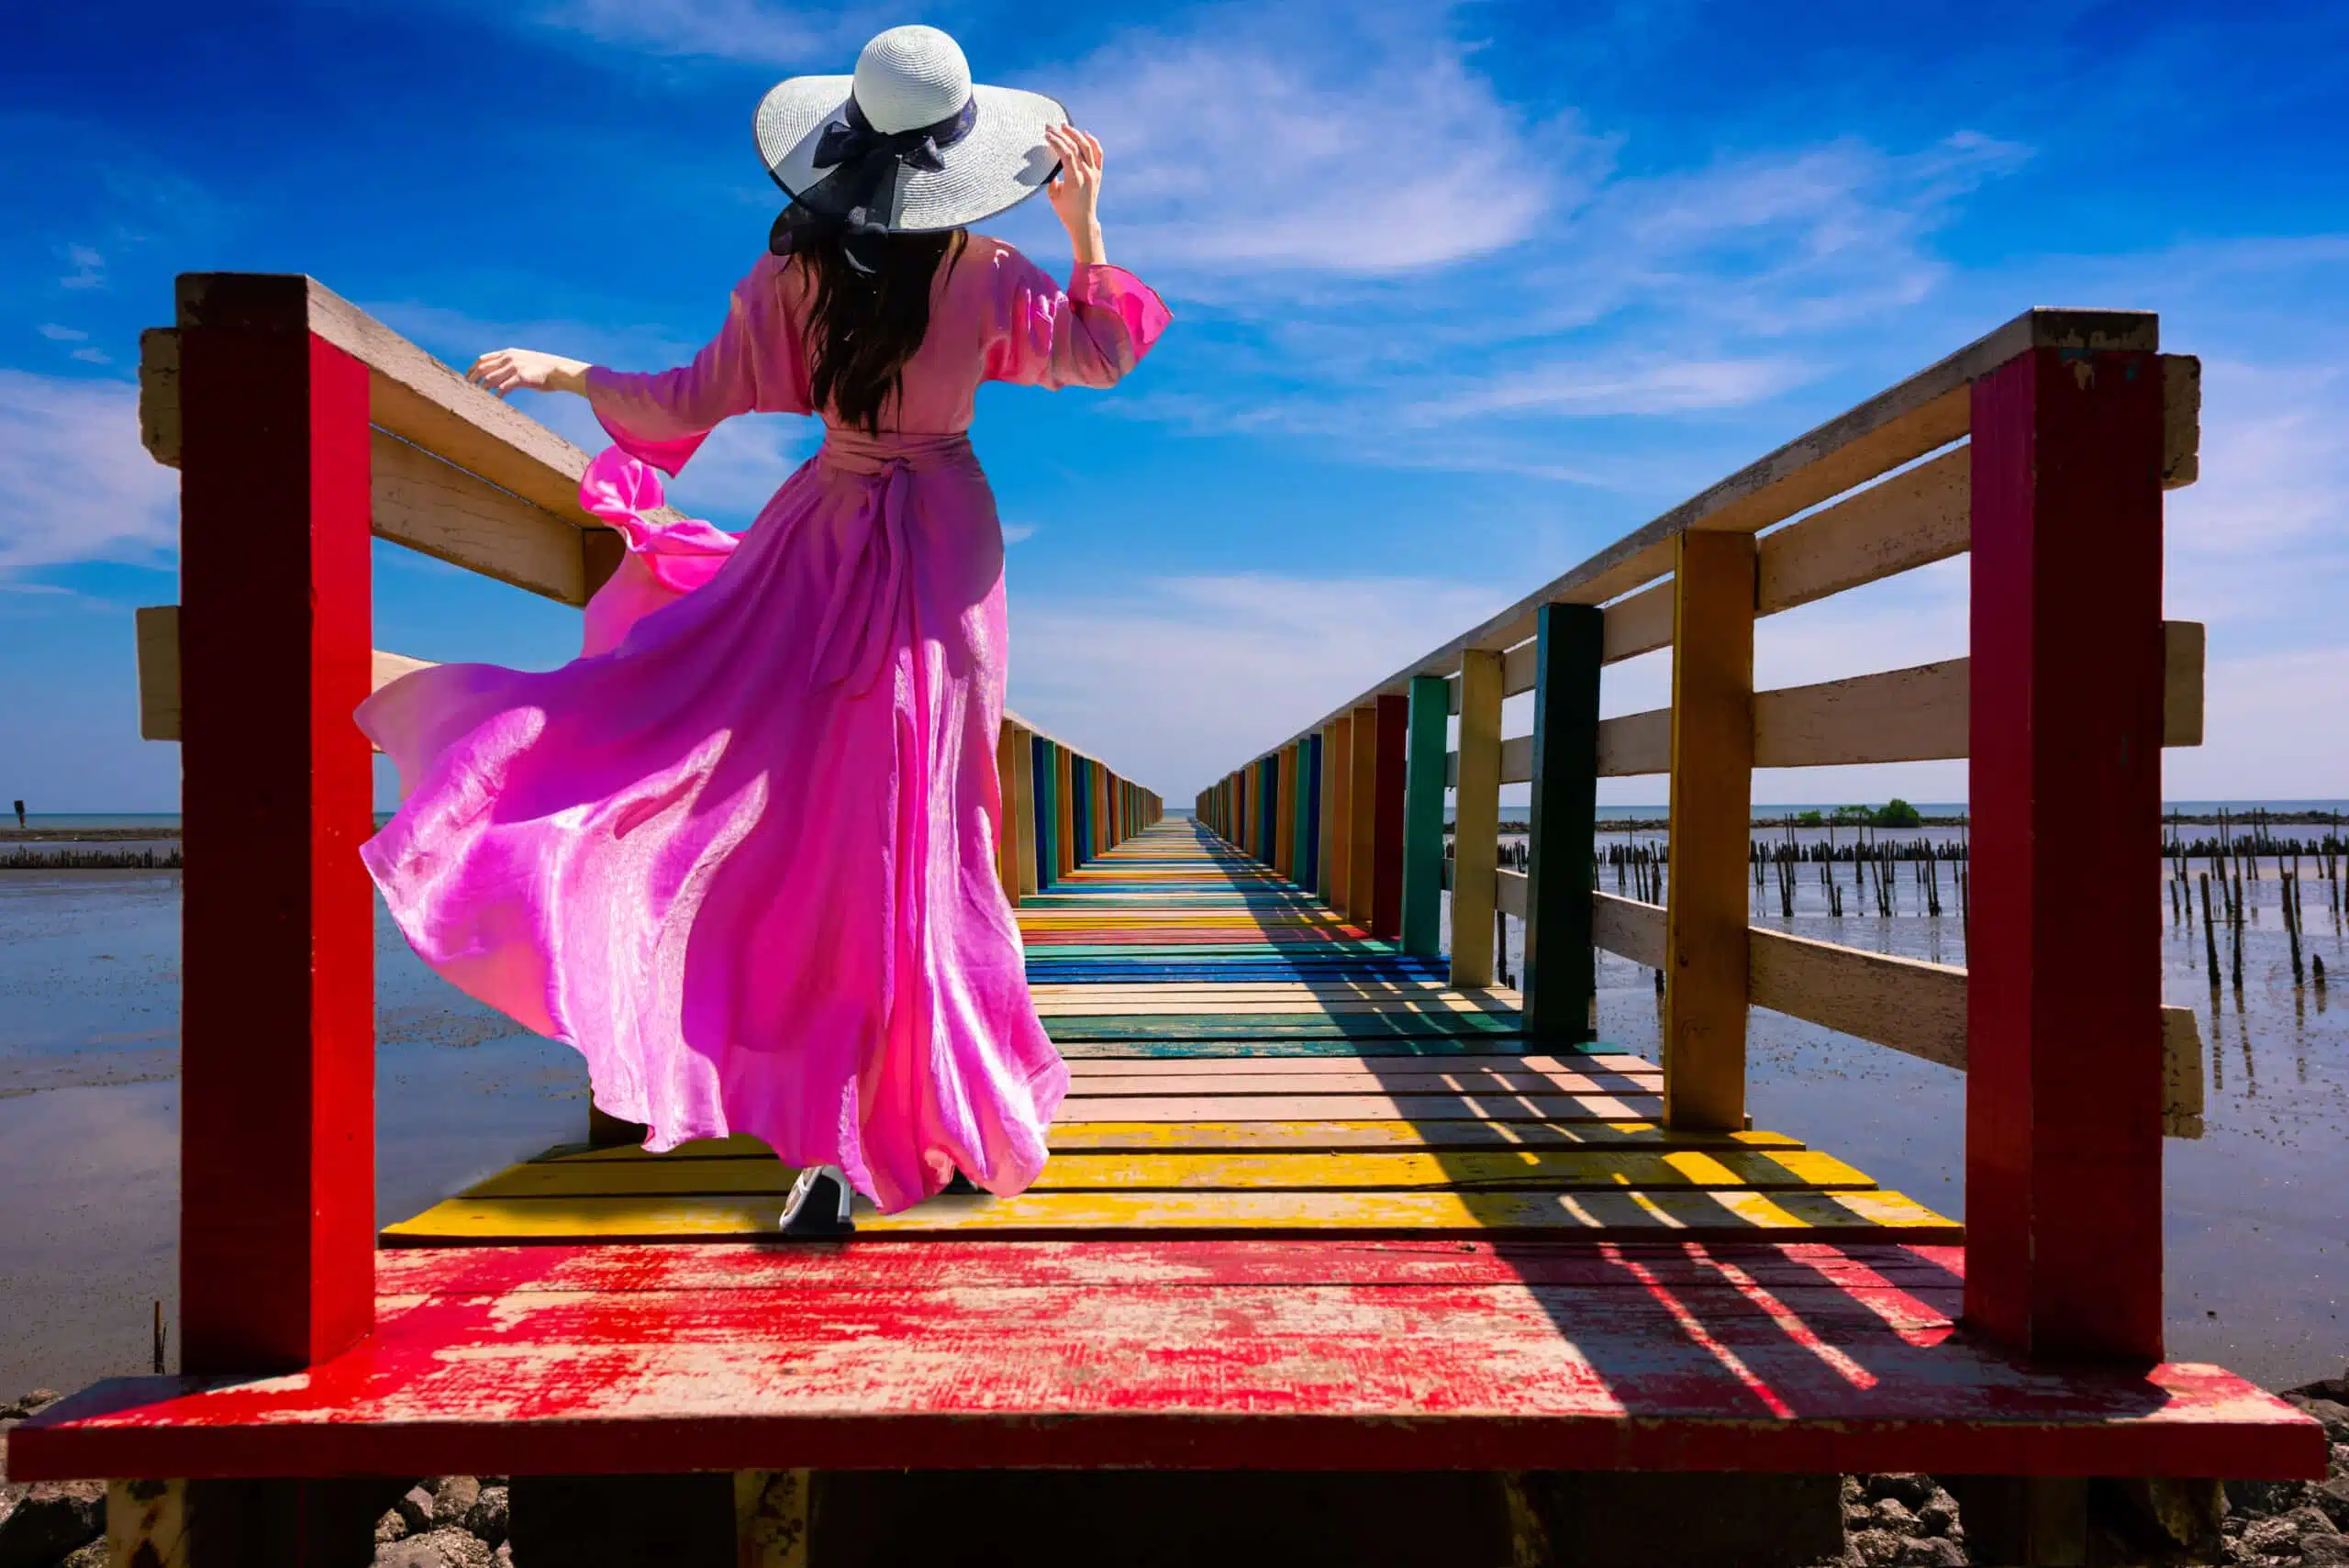 woman wearing purple dress standing on a colorful wooden bridge over the lake